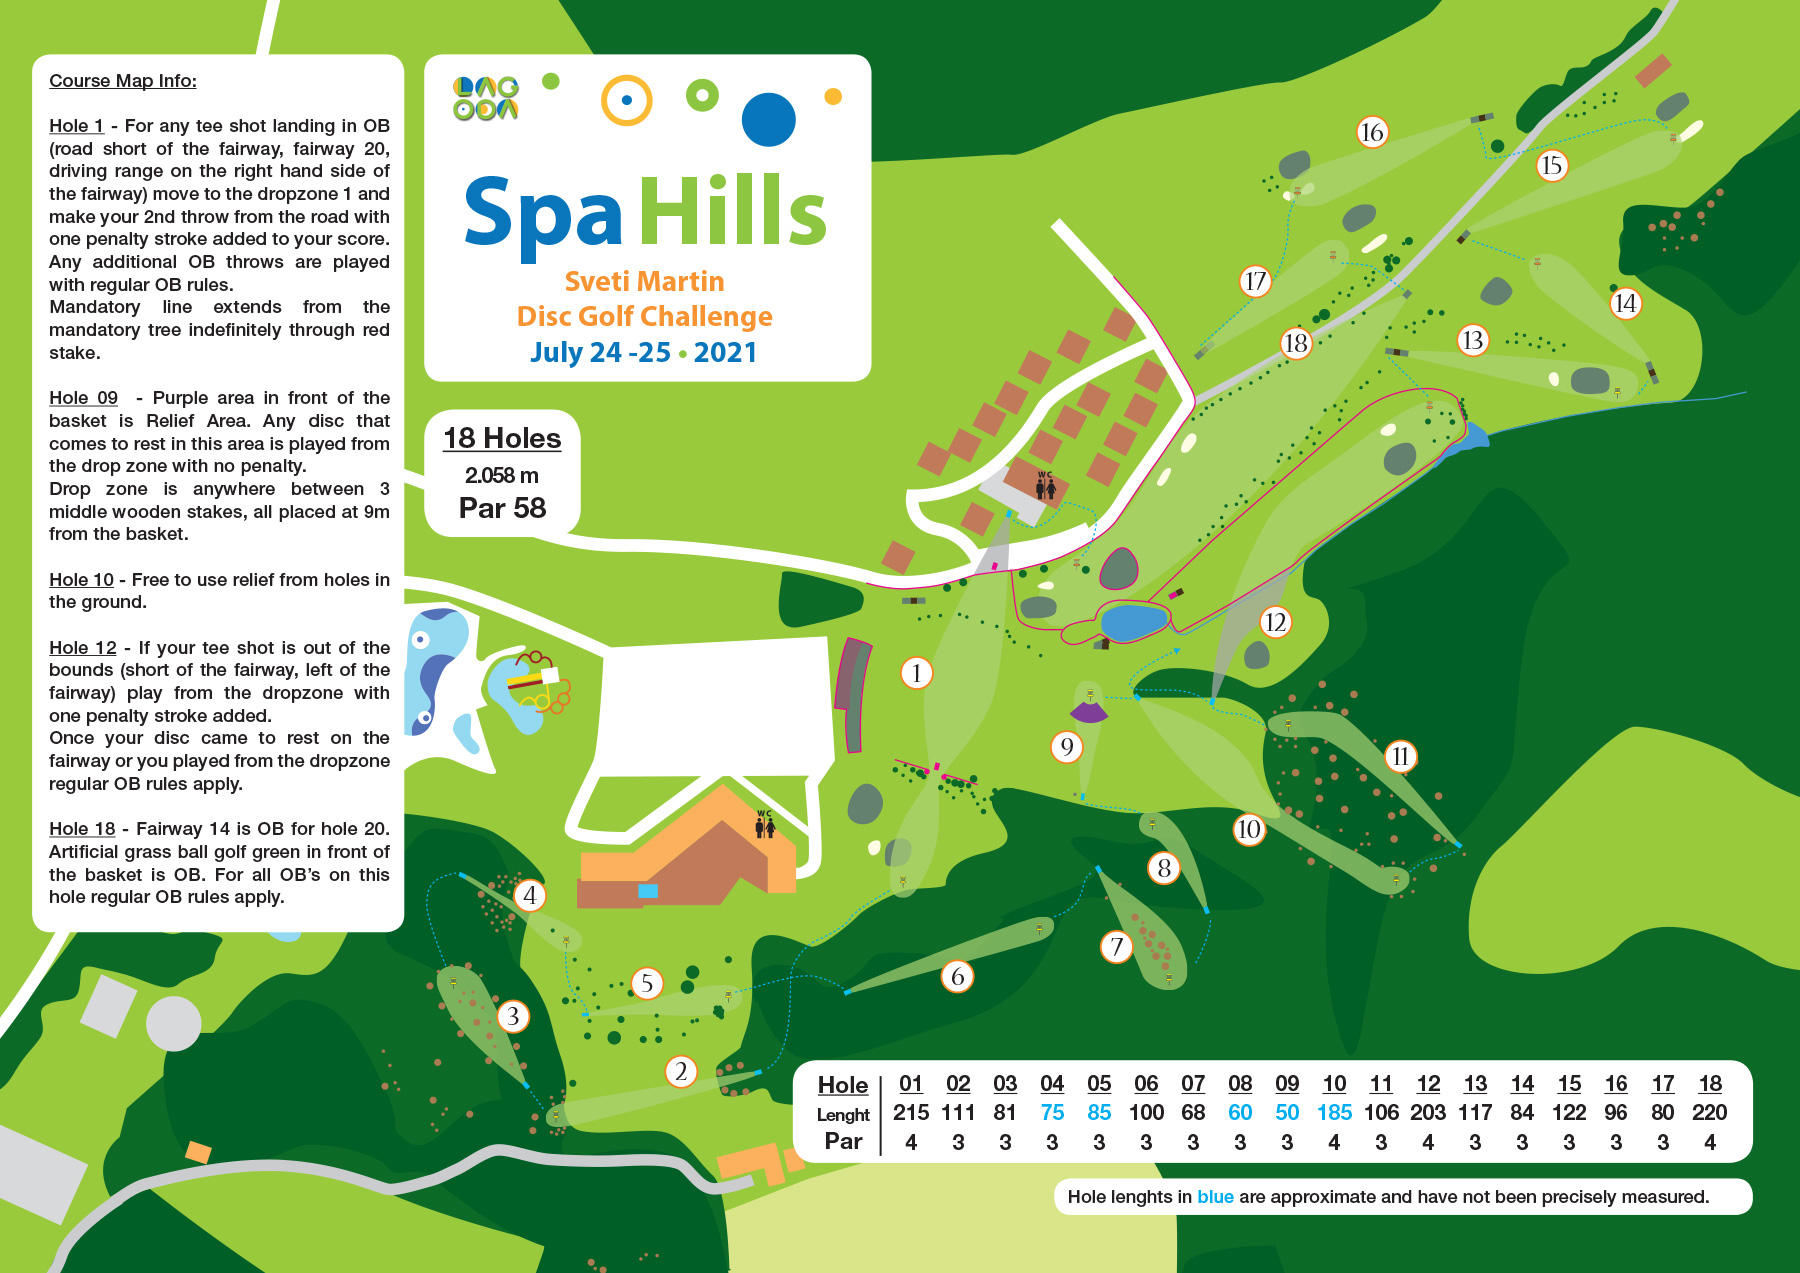 Spa Hills 2021 course map